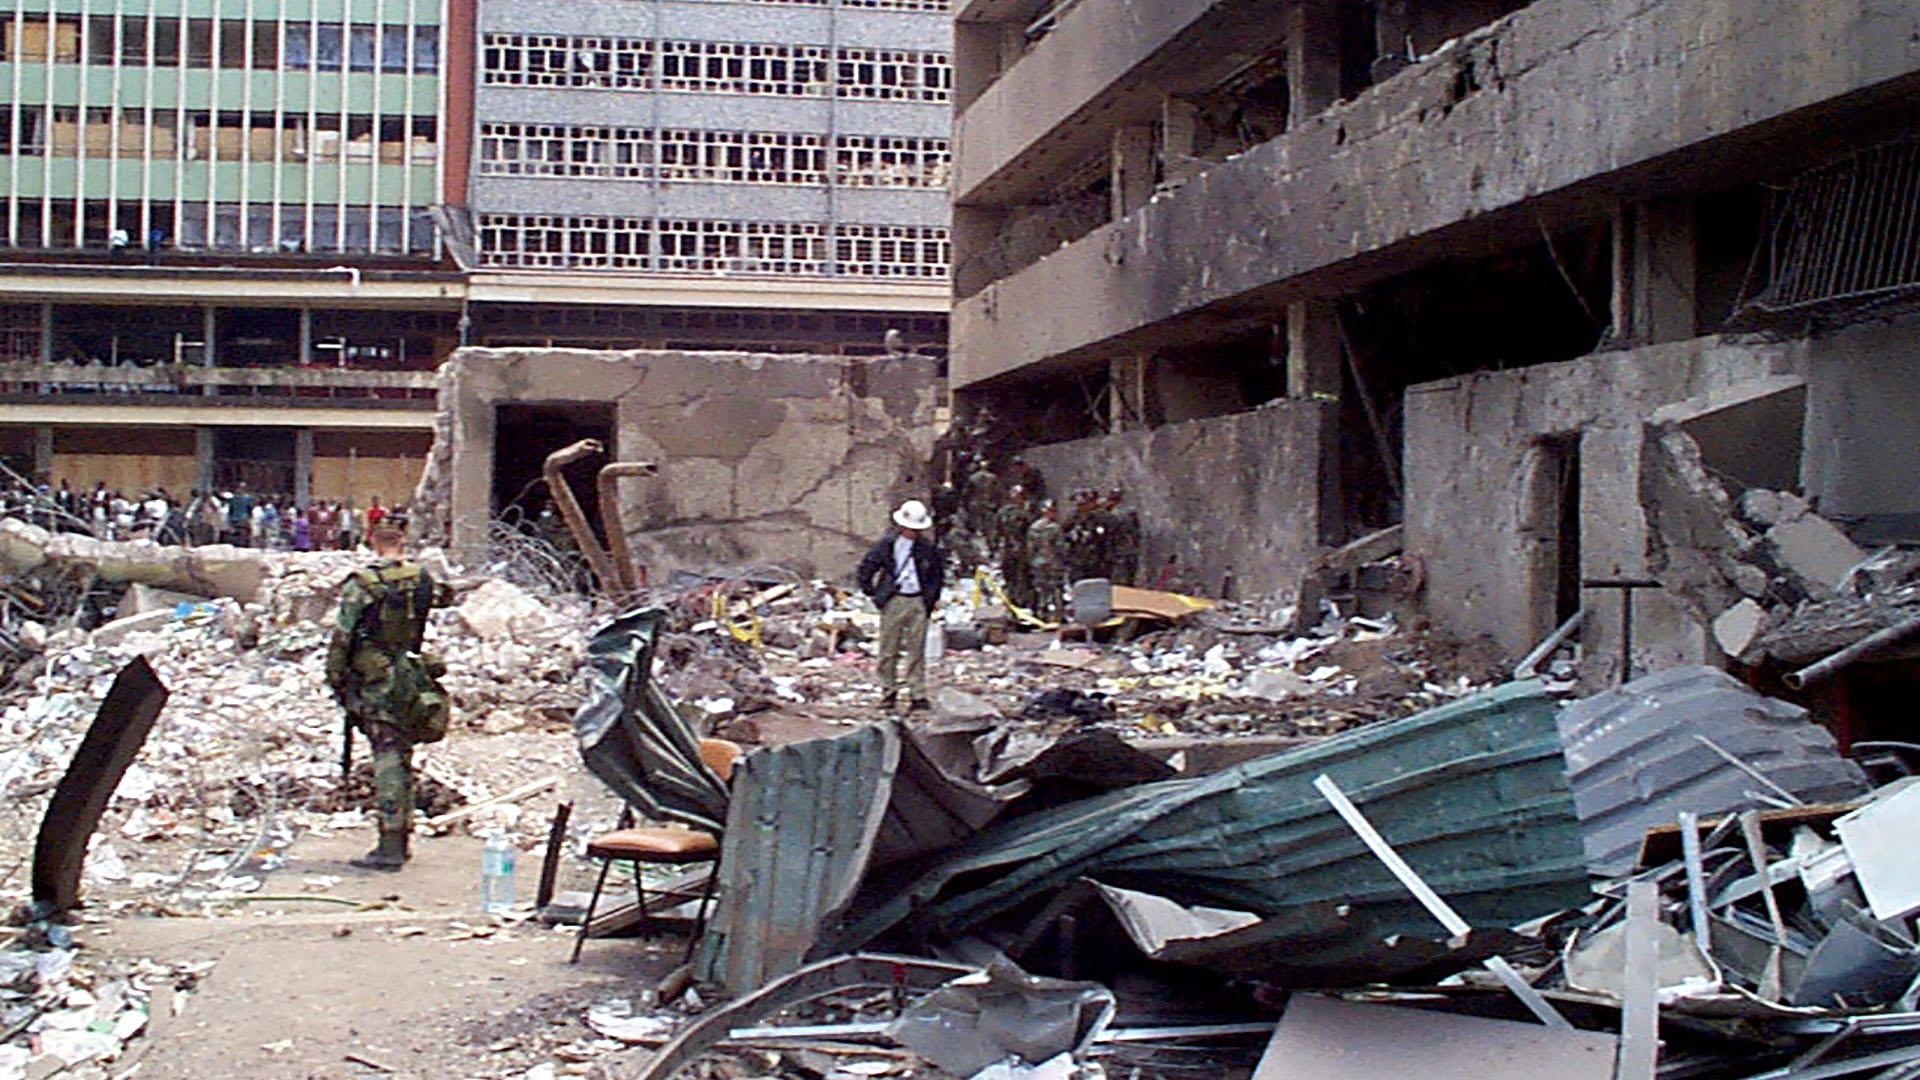 groups of civilians, soldiers in camouflage, and a person in a white hat standing among the debris next to a bombed building